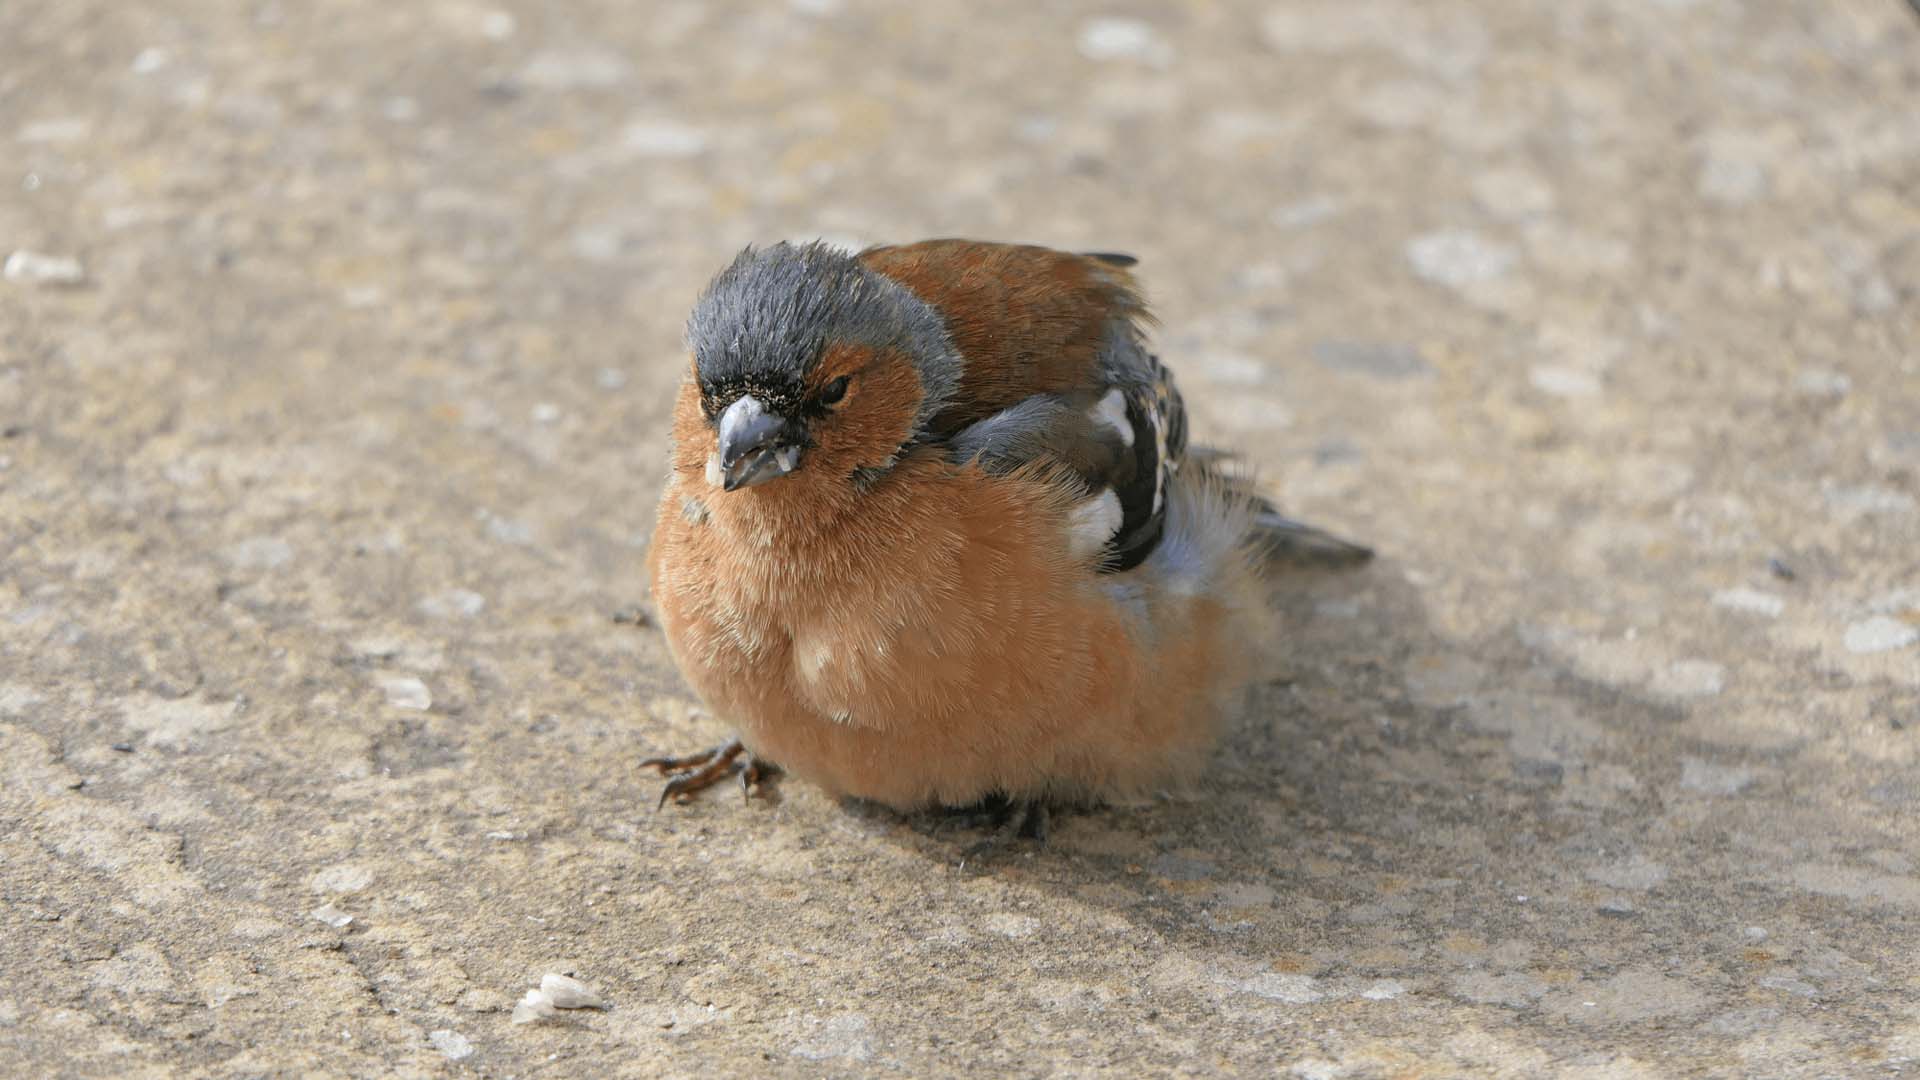 A sign of trichomonosis in chaffinches is matted plumage and uneaten food around their beak